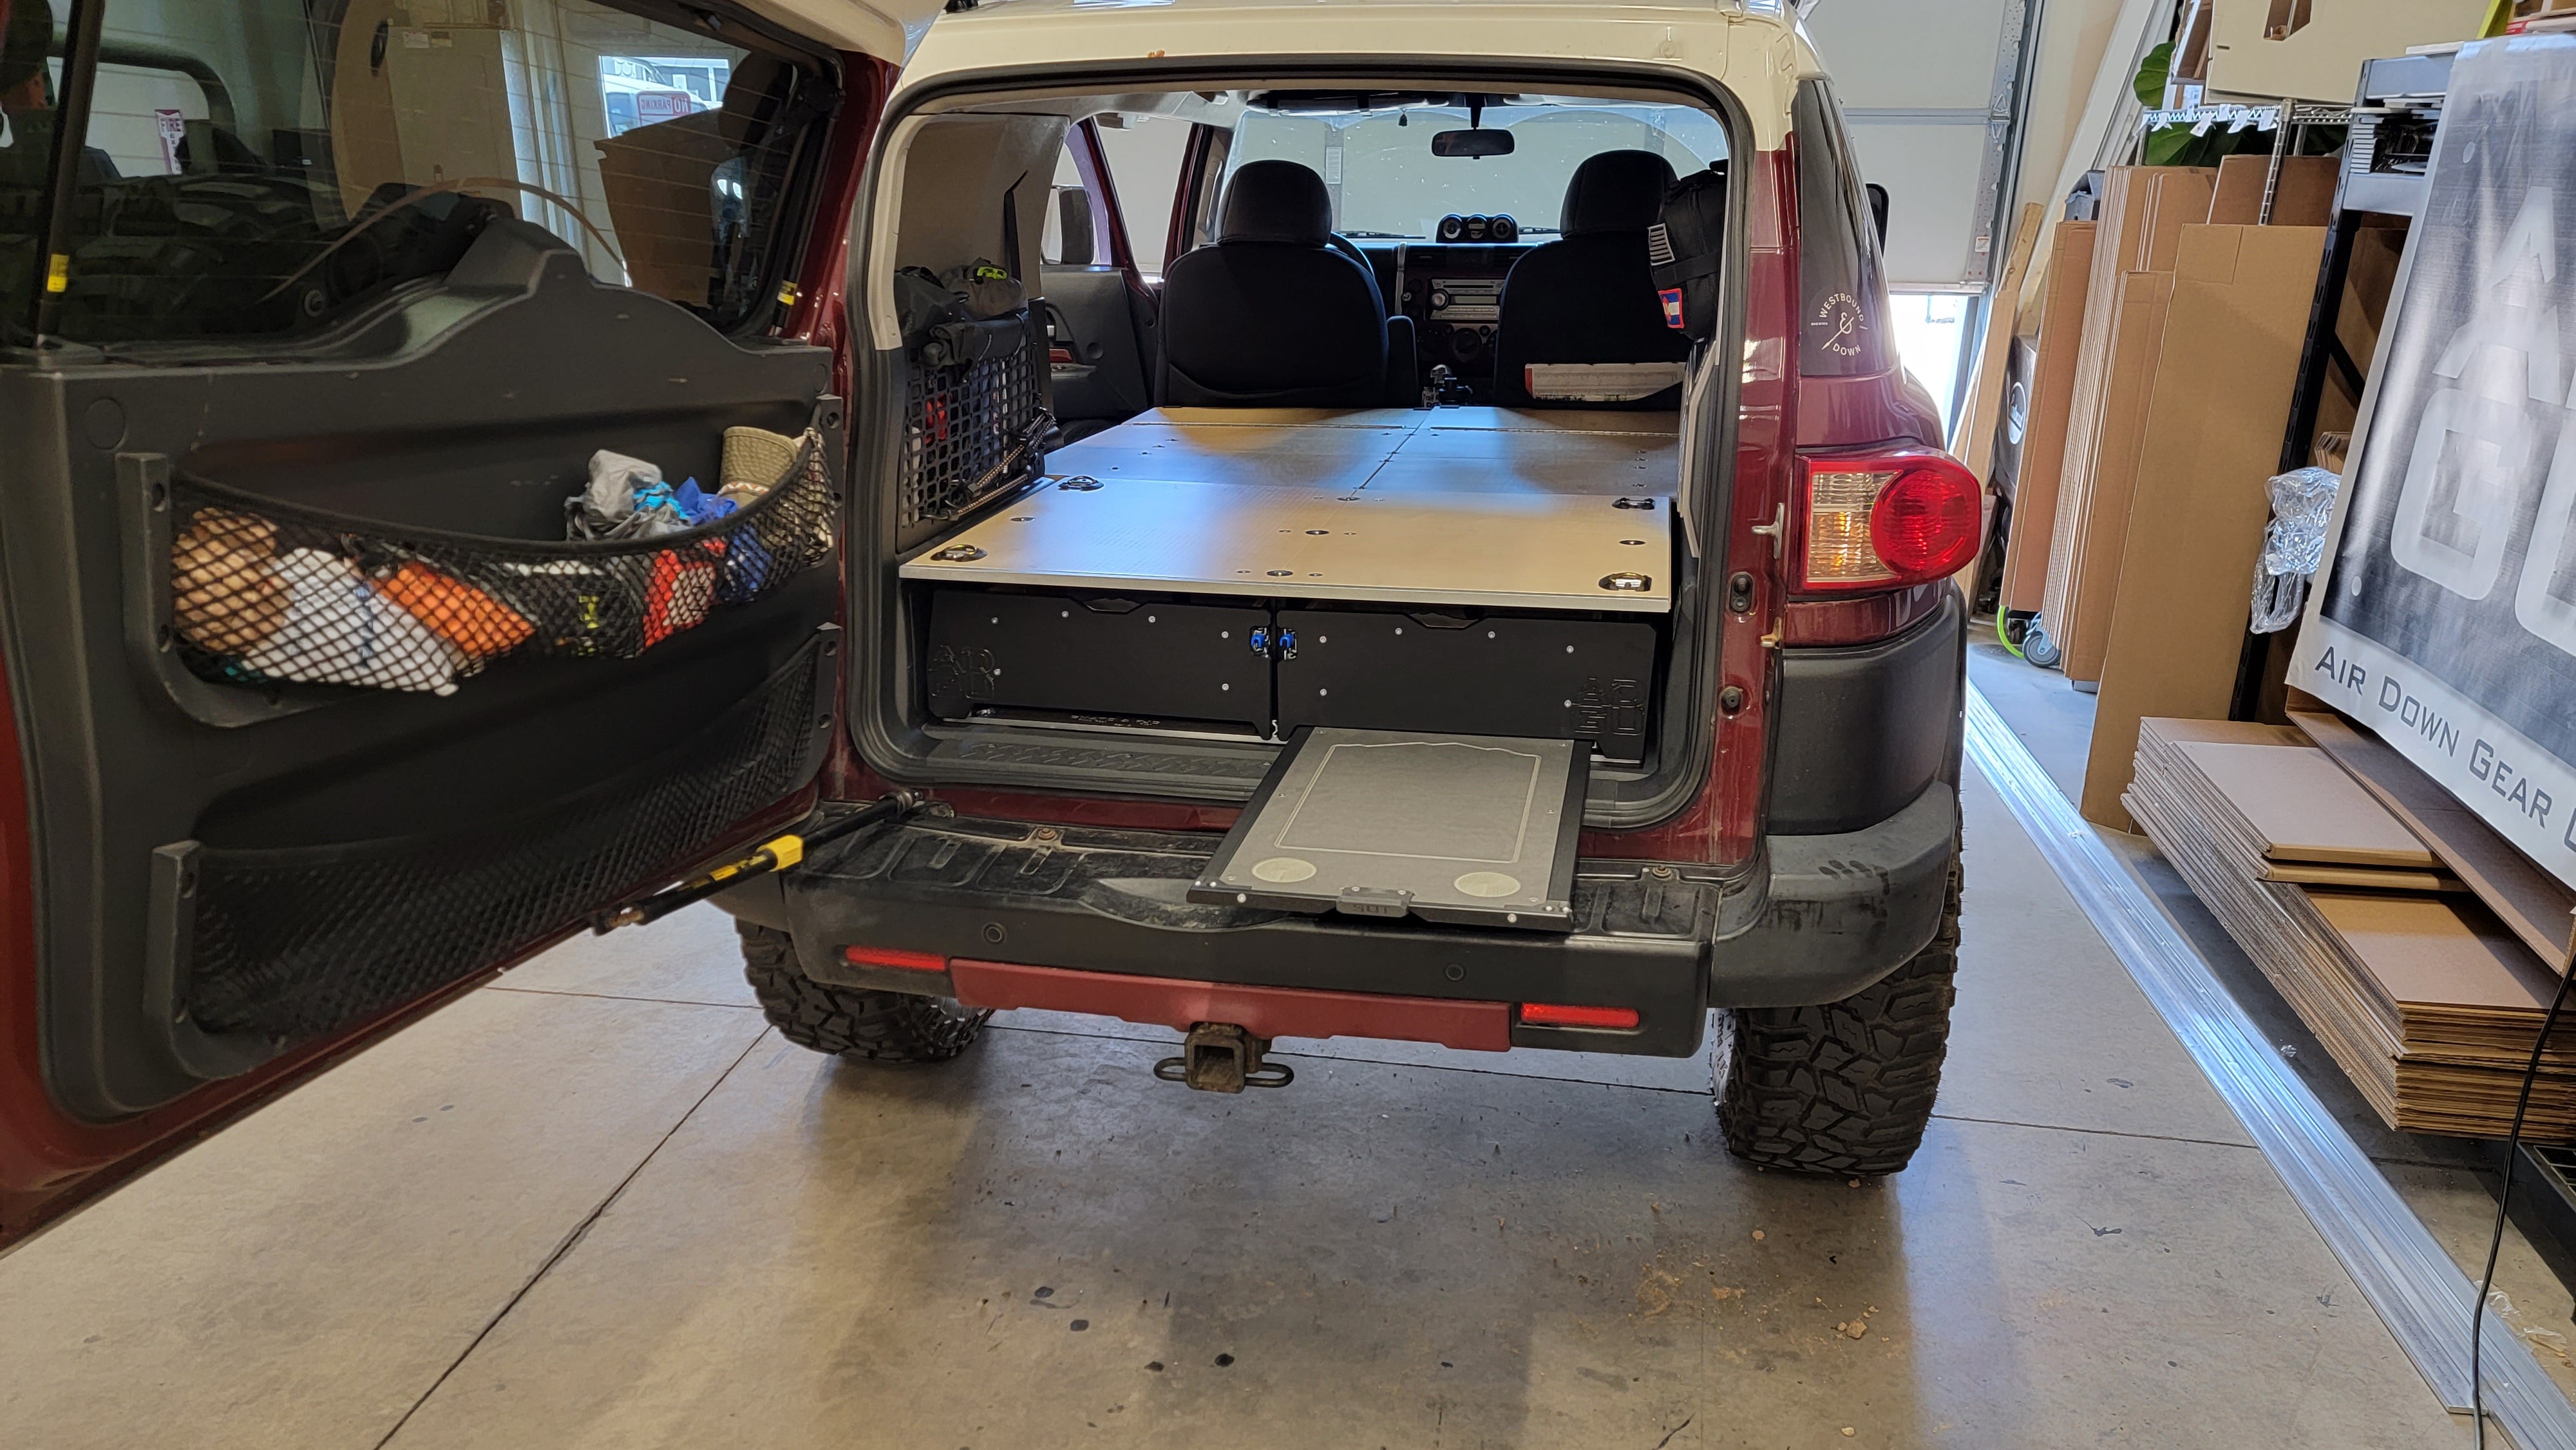 Toyota FJ Cruiser  drawer system with sleeping platform for vehicle organization perfect for overland travel.